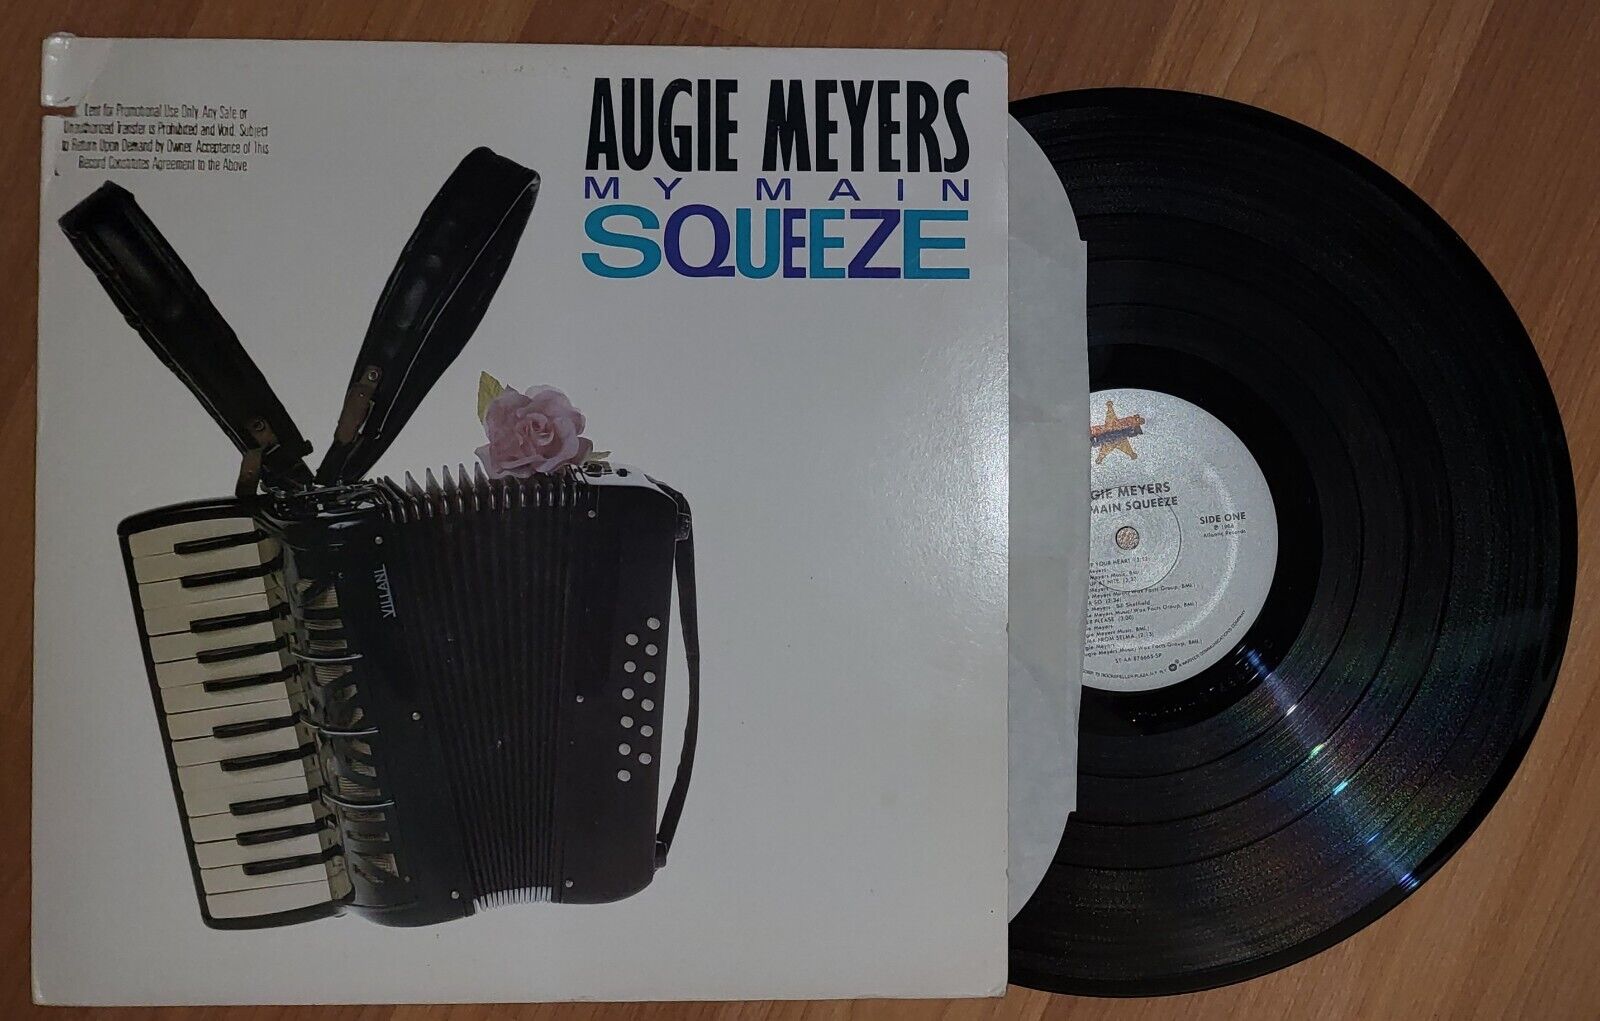 Augie Meyers - My Main Squeeze - Vinyl Record - L7350L - Rare Promo Record! 